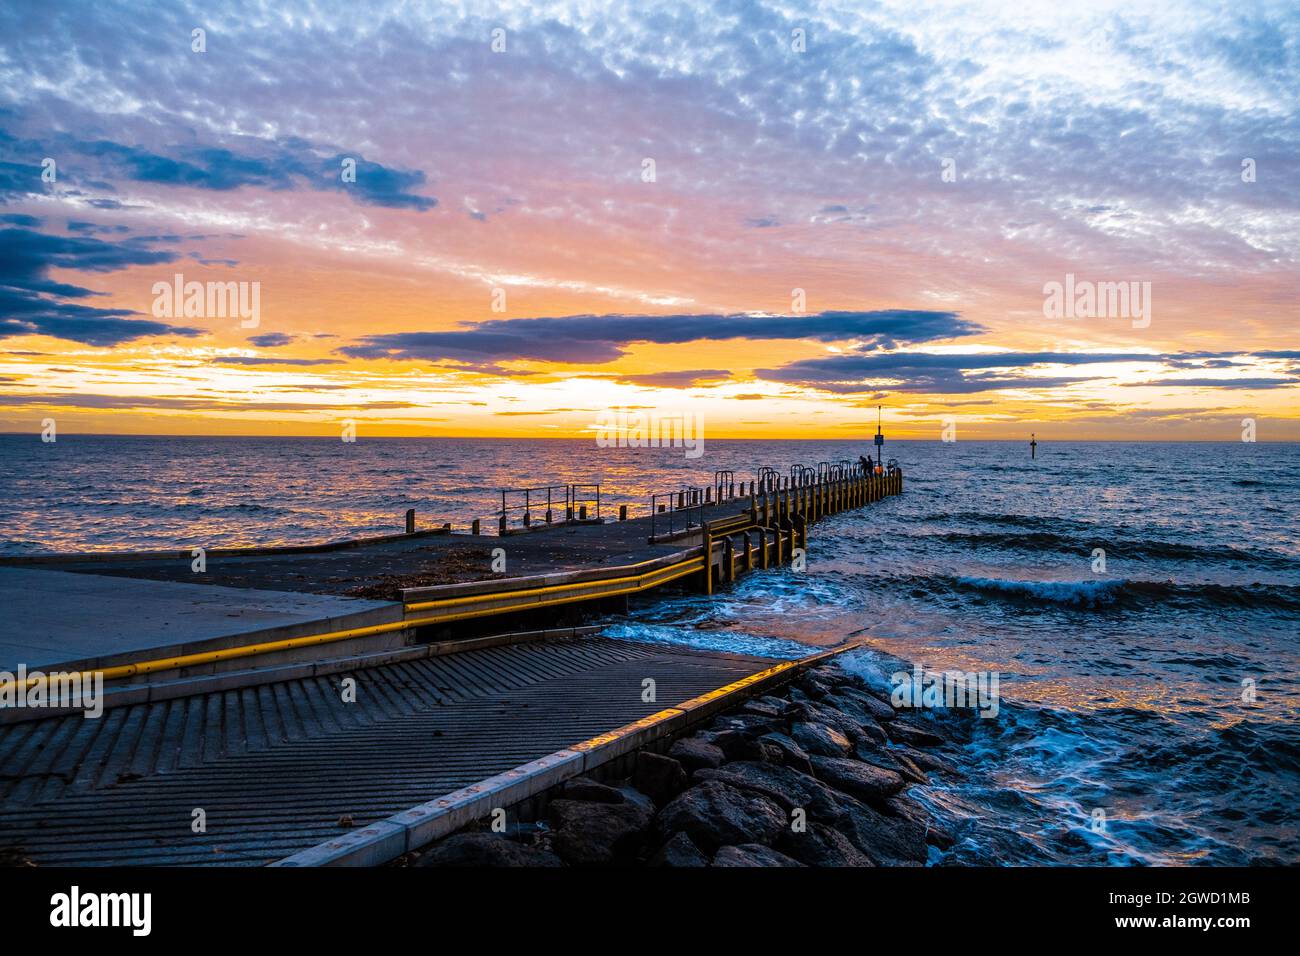 Beautiful Glowing Sunset Over Ocean And Small Boat Jetty In Melbourne, Australia Stock Photo